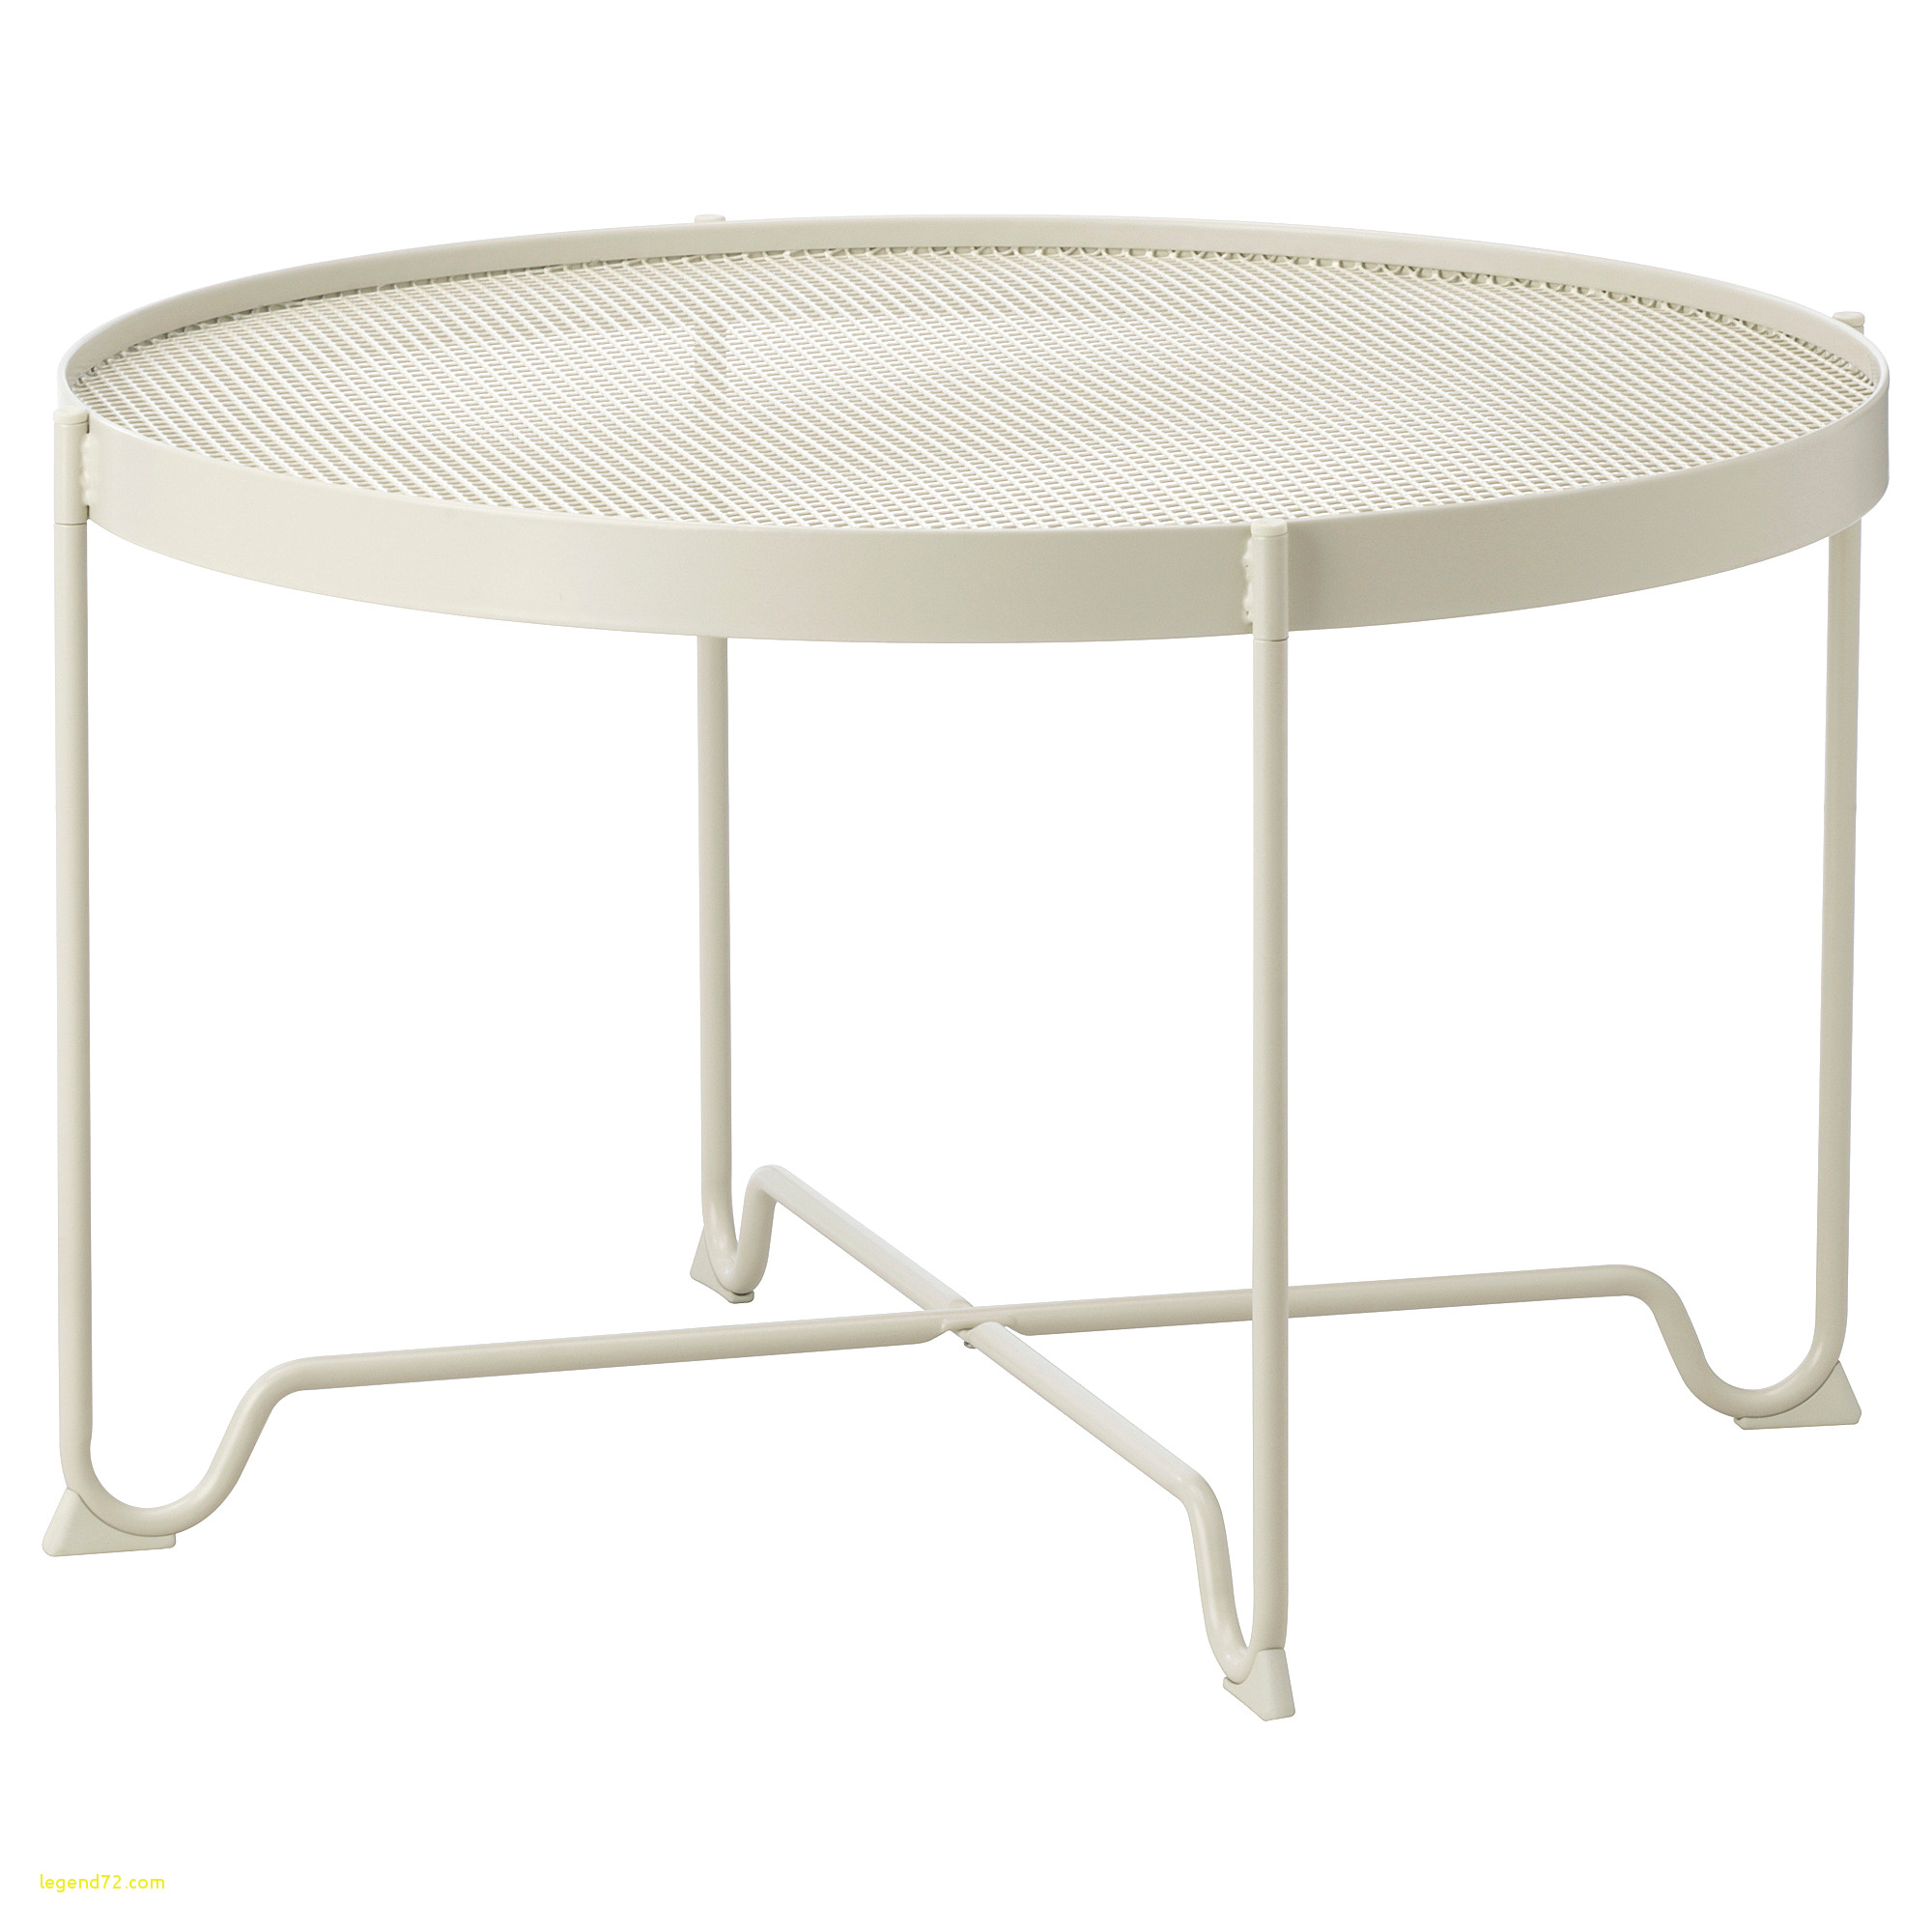 top result luxury diy end tables plans ture fresh outdoor side table round coffee inspirational rowan small bulk tennis balls grill kidkraft twin pottery barn desk room essentials